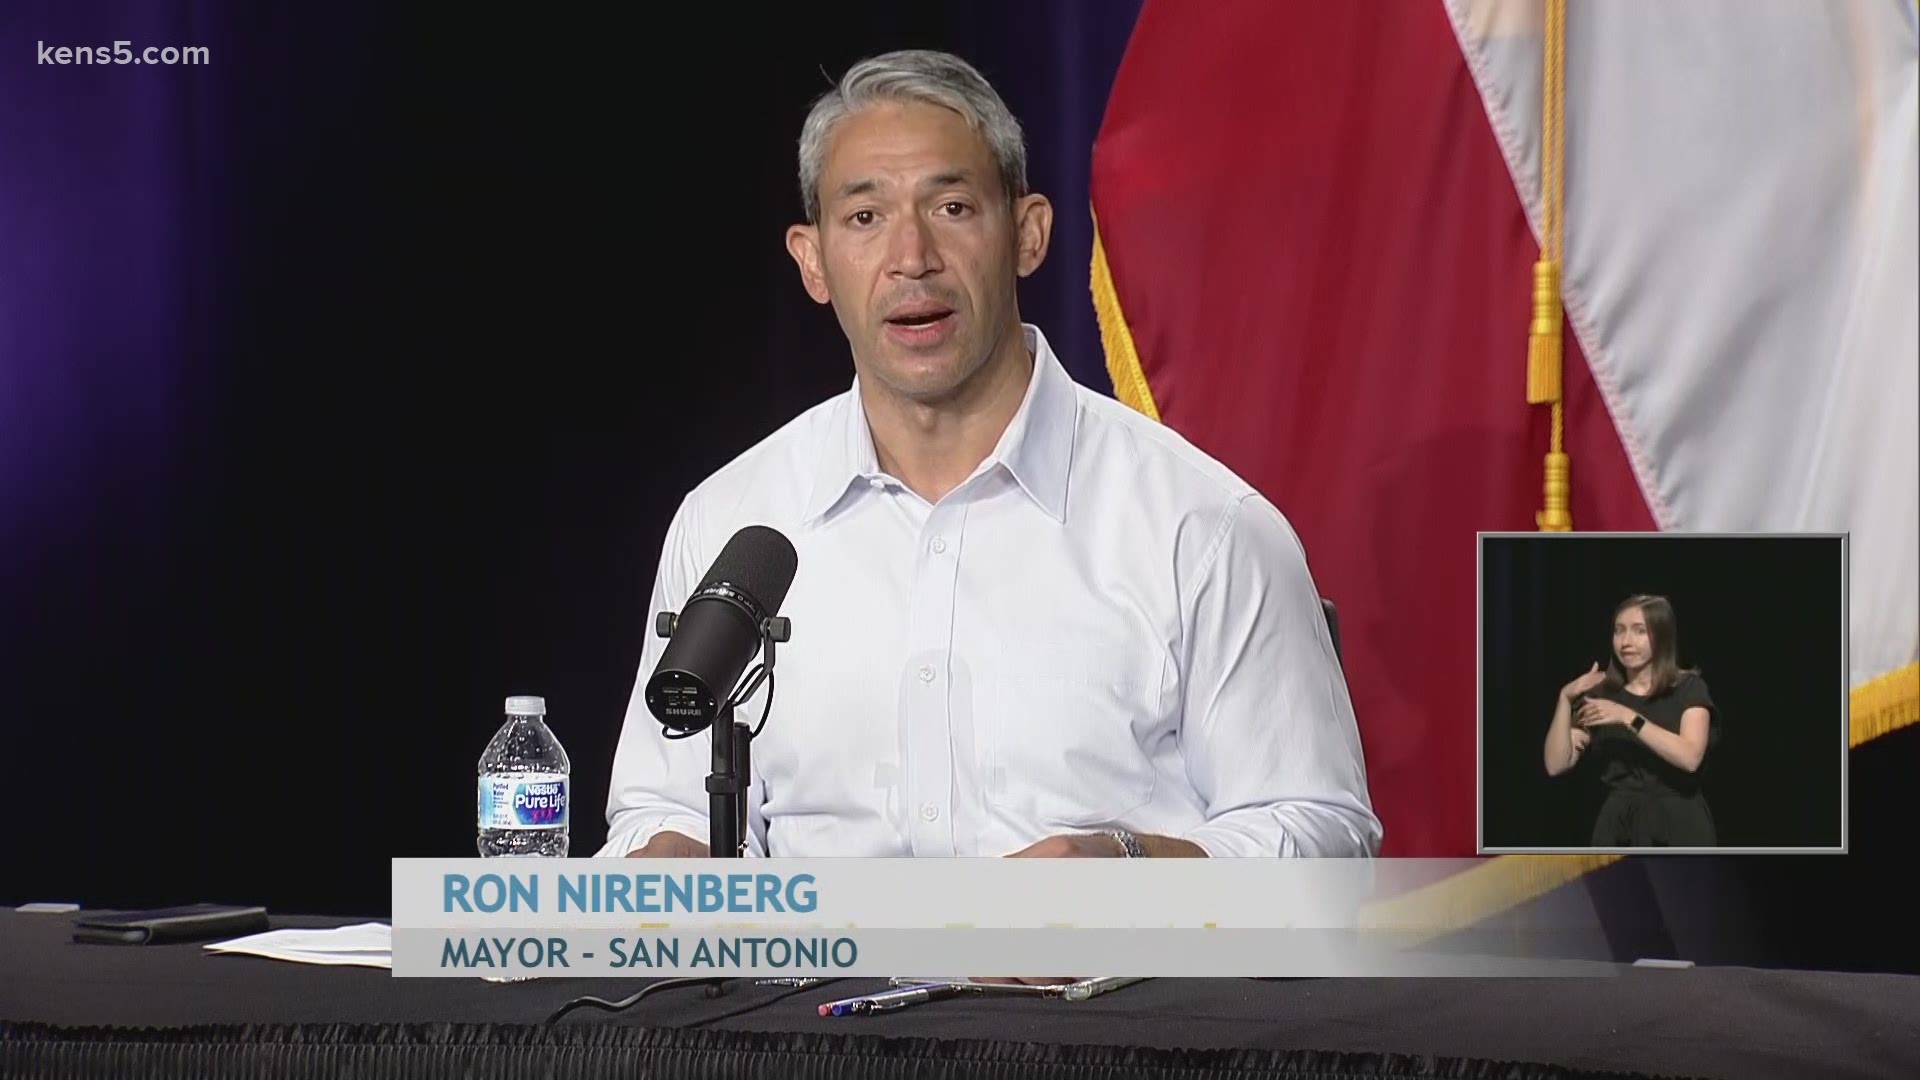 Mayor Ron Nirenberg reported an additional 101 coronavirus cases, bringing the total in Bexar County past 50,000. No new deaths were reported.